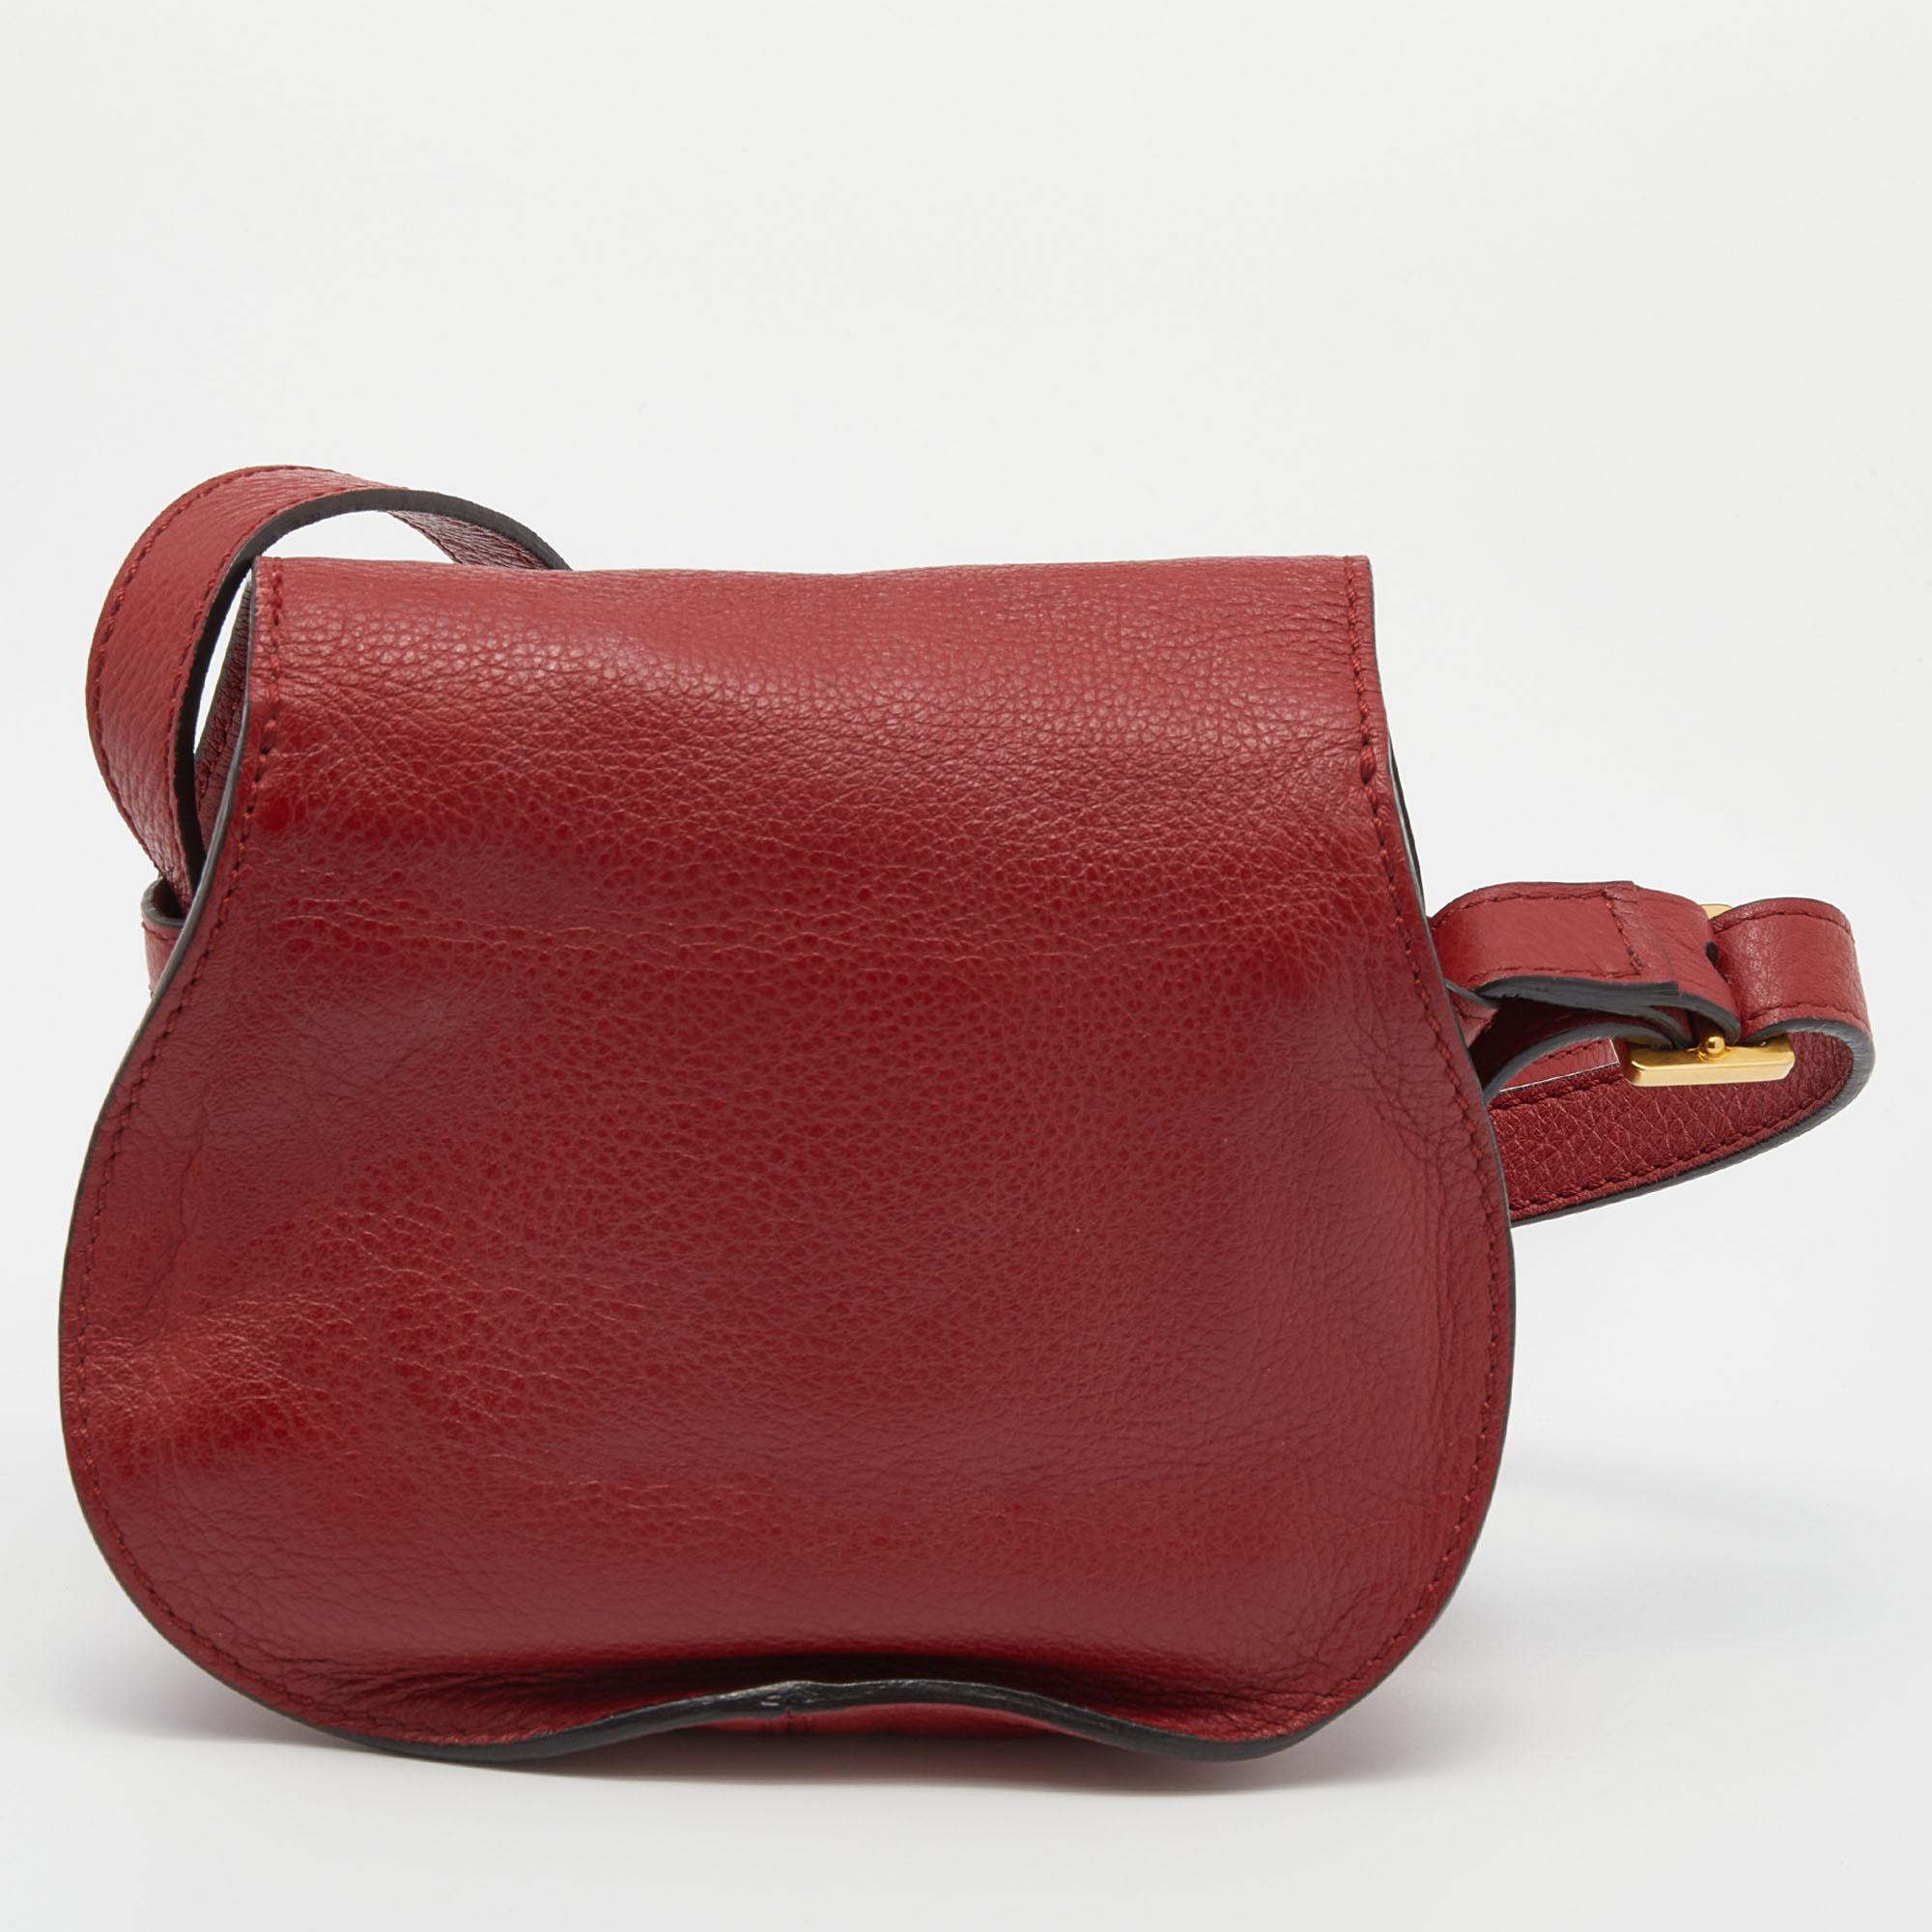 A timeless design that will last you season after season, the Marcie bag from Chloé is a wardrobe essential. The cross-body bag features neat stitching details on the flap in a distinctive shape. Crafted from red-hued leather to a compact